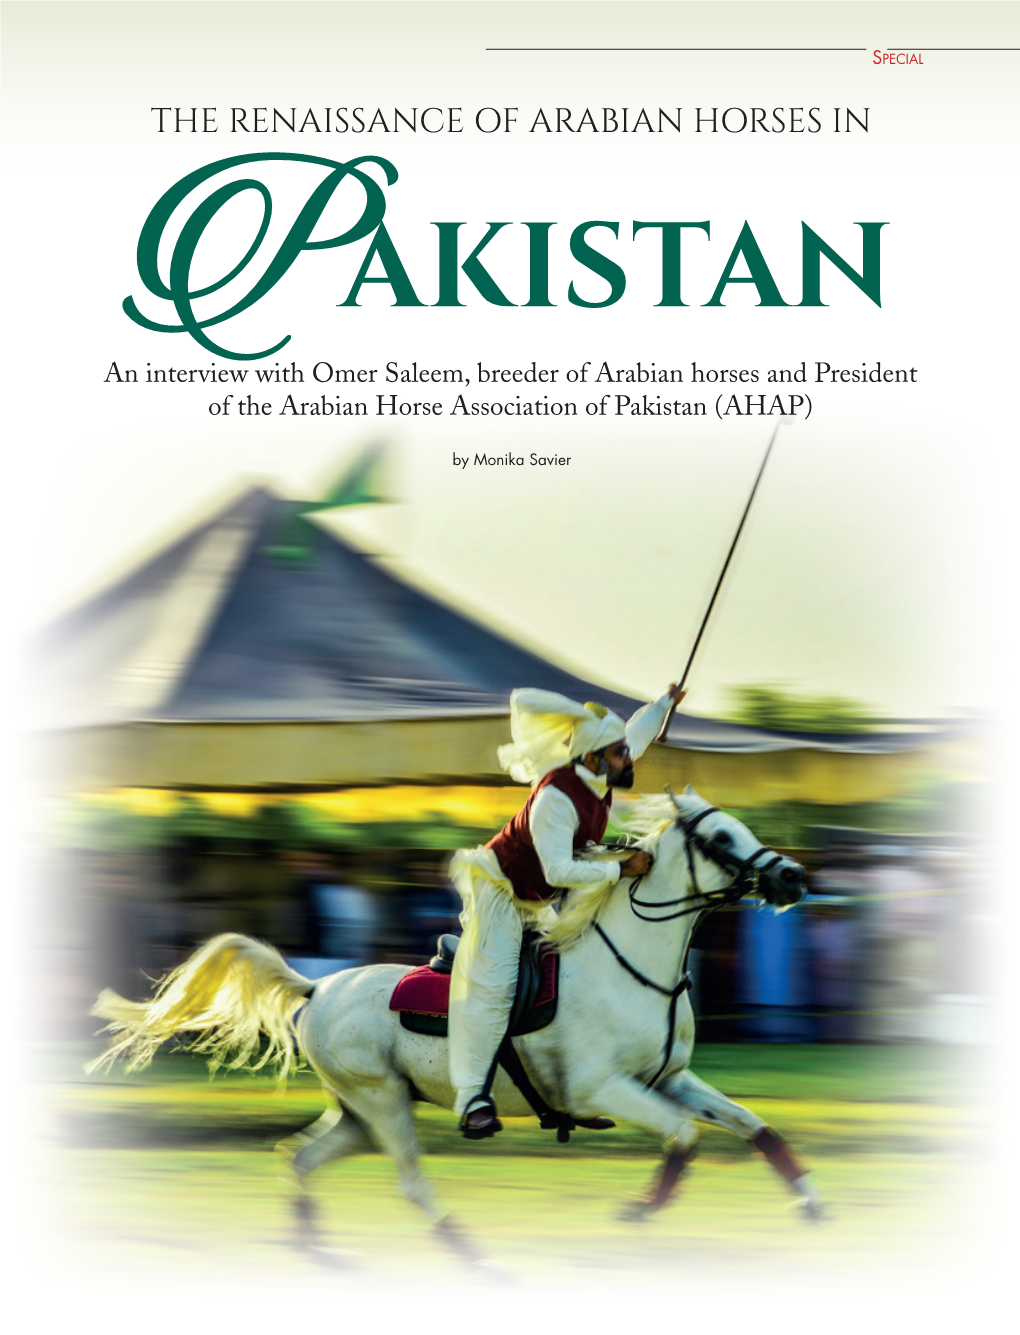 An Interview with Omer Saleem, Breeder of Arabian Horses and President of the Arabian Horse Association of Pakistan (AHAP)